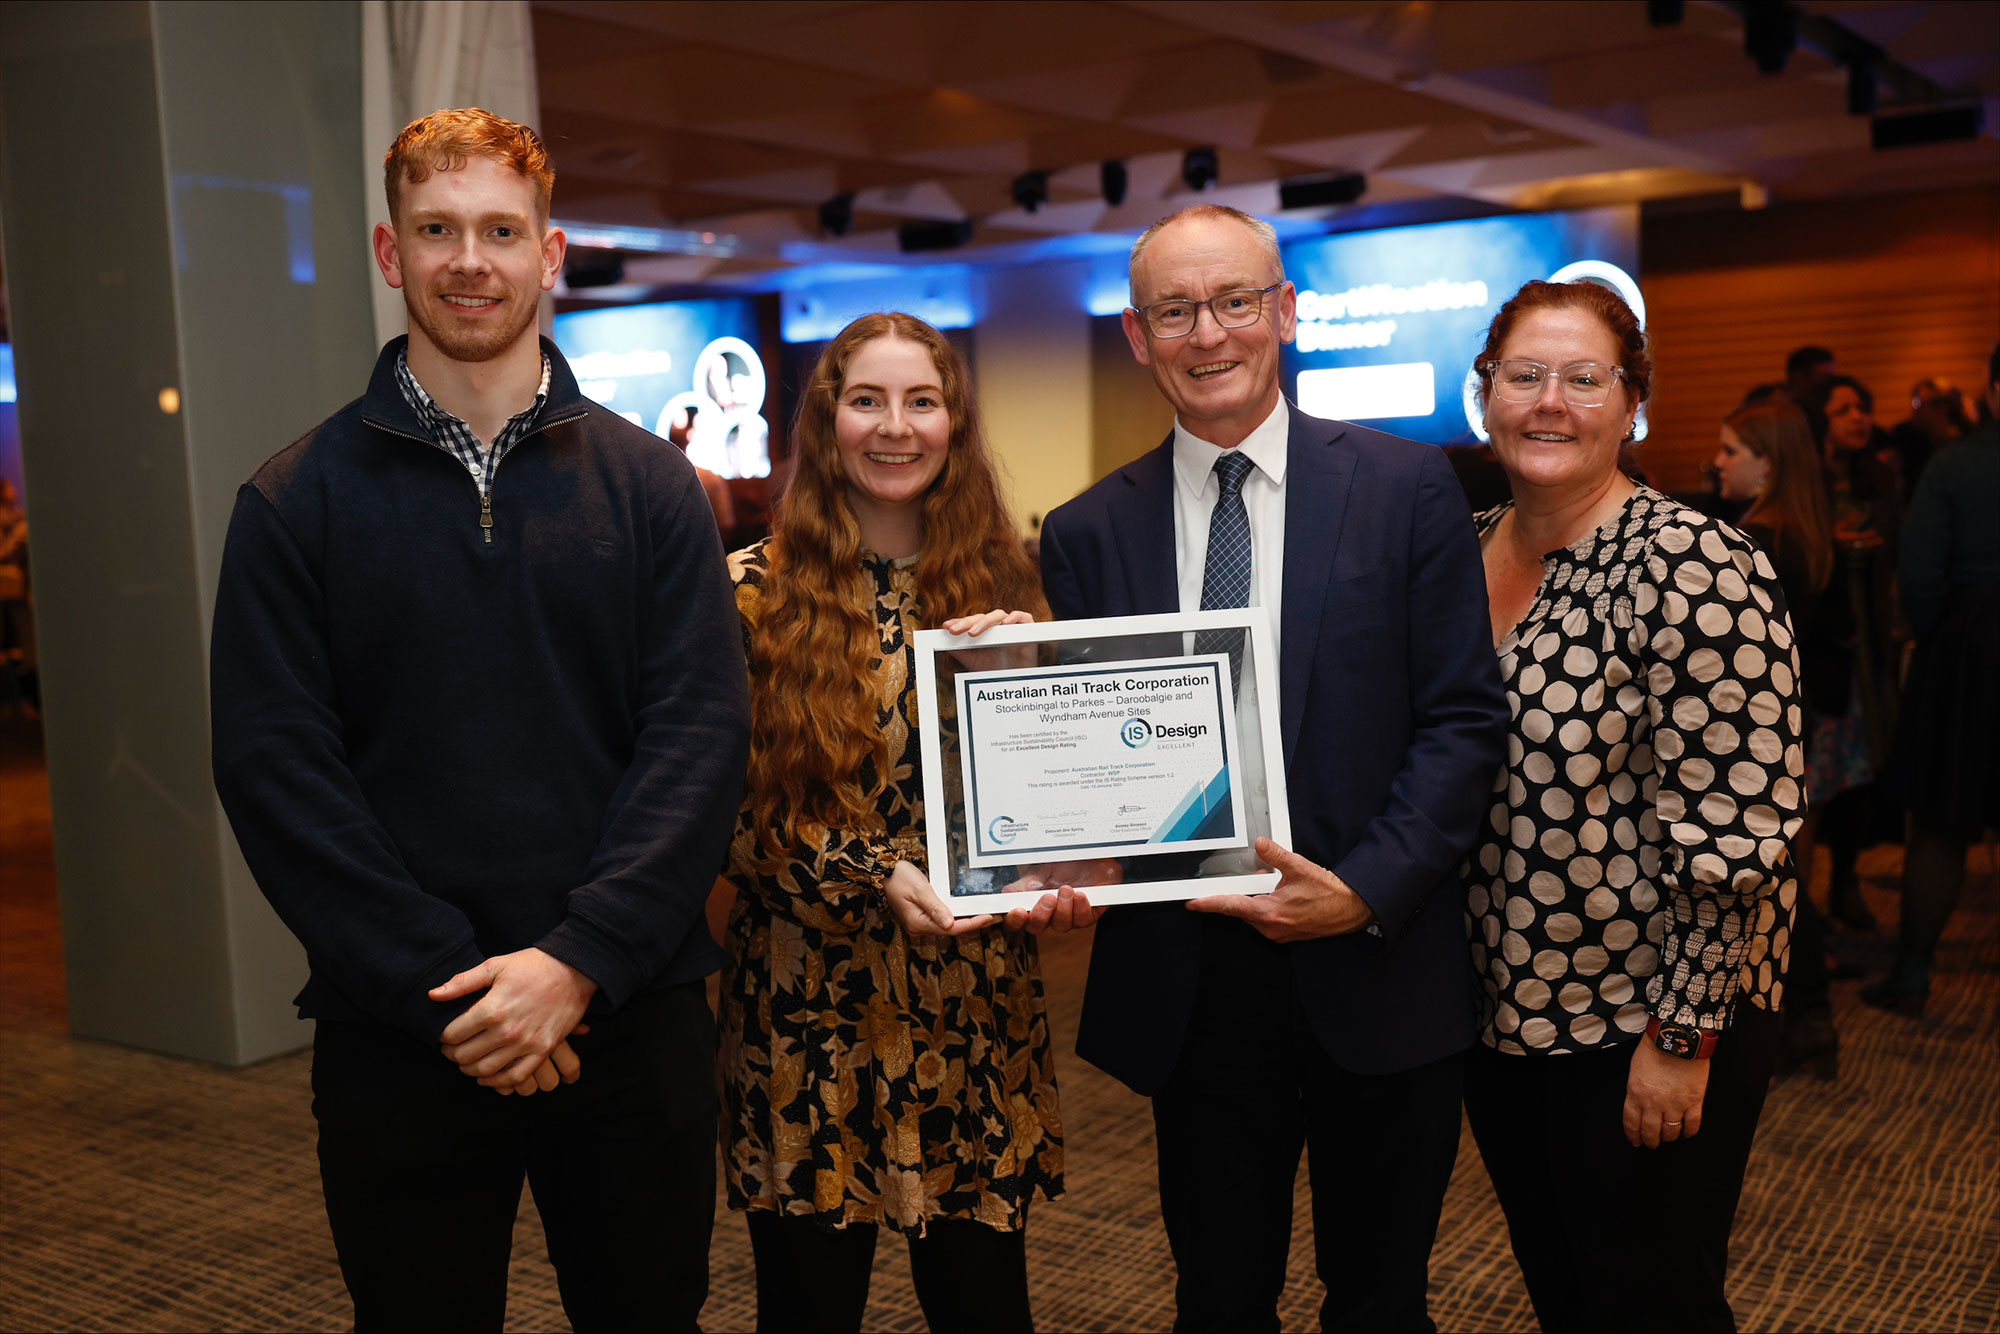 Inland Rail sustainability team members (left to right) Liam West, Meghan Cowling, Andrew Aitken & Sarah Connelly pictured with the IS Council award at the Annual Conference Certification Dinner in Melbourne